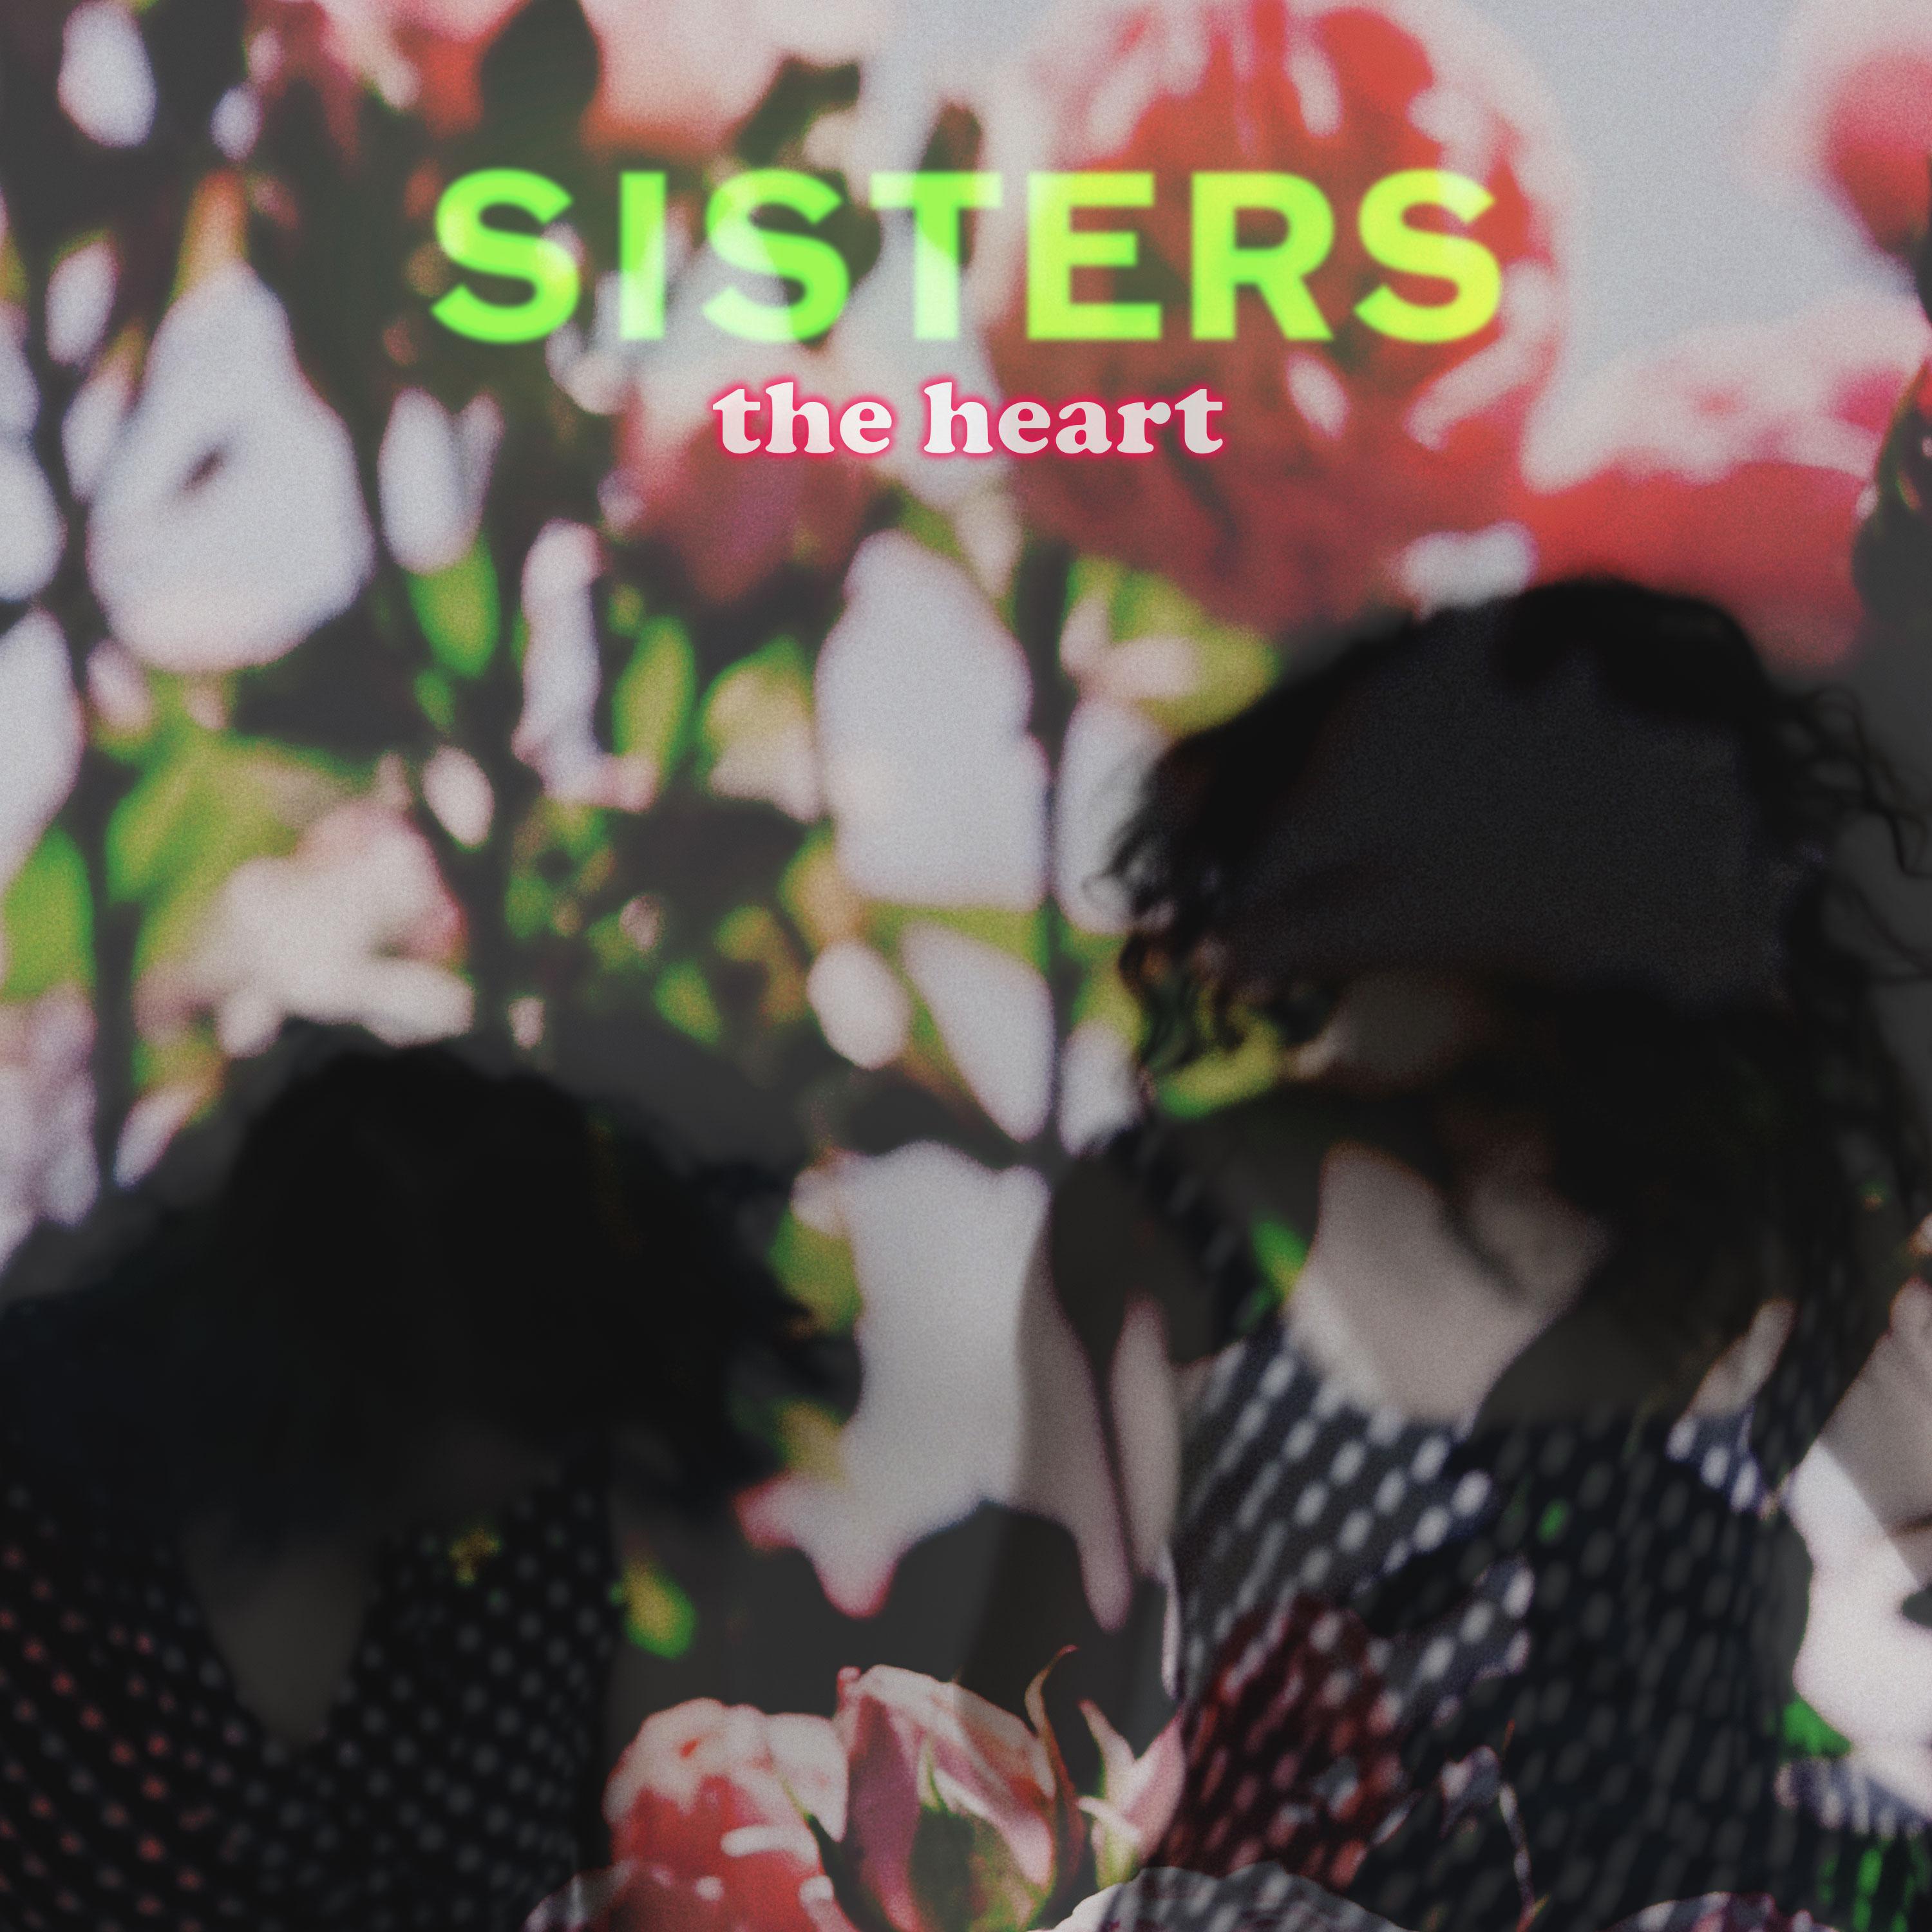 Thumbnail for "SISTERS: Debreif-isode".